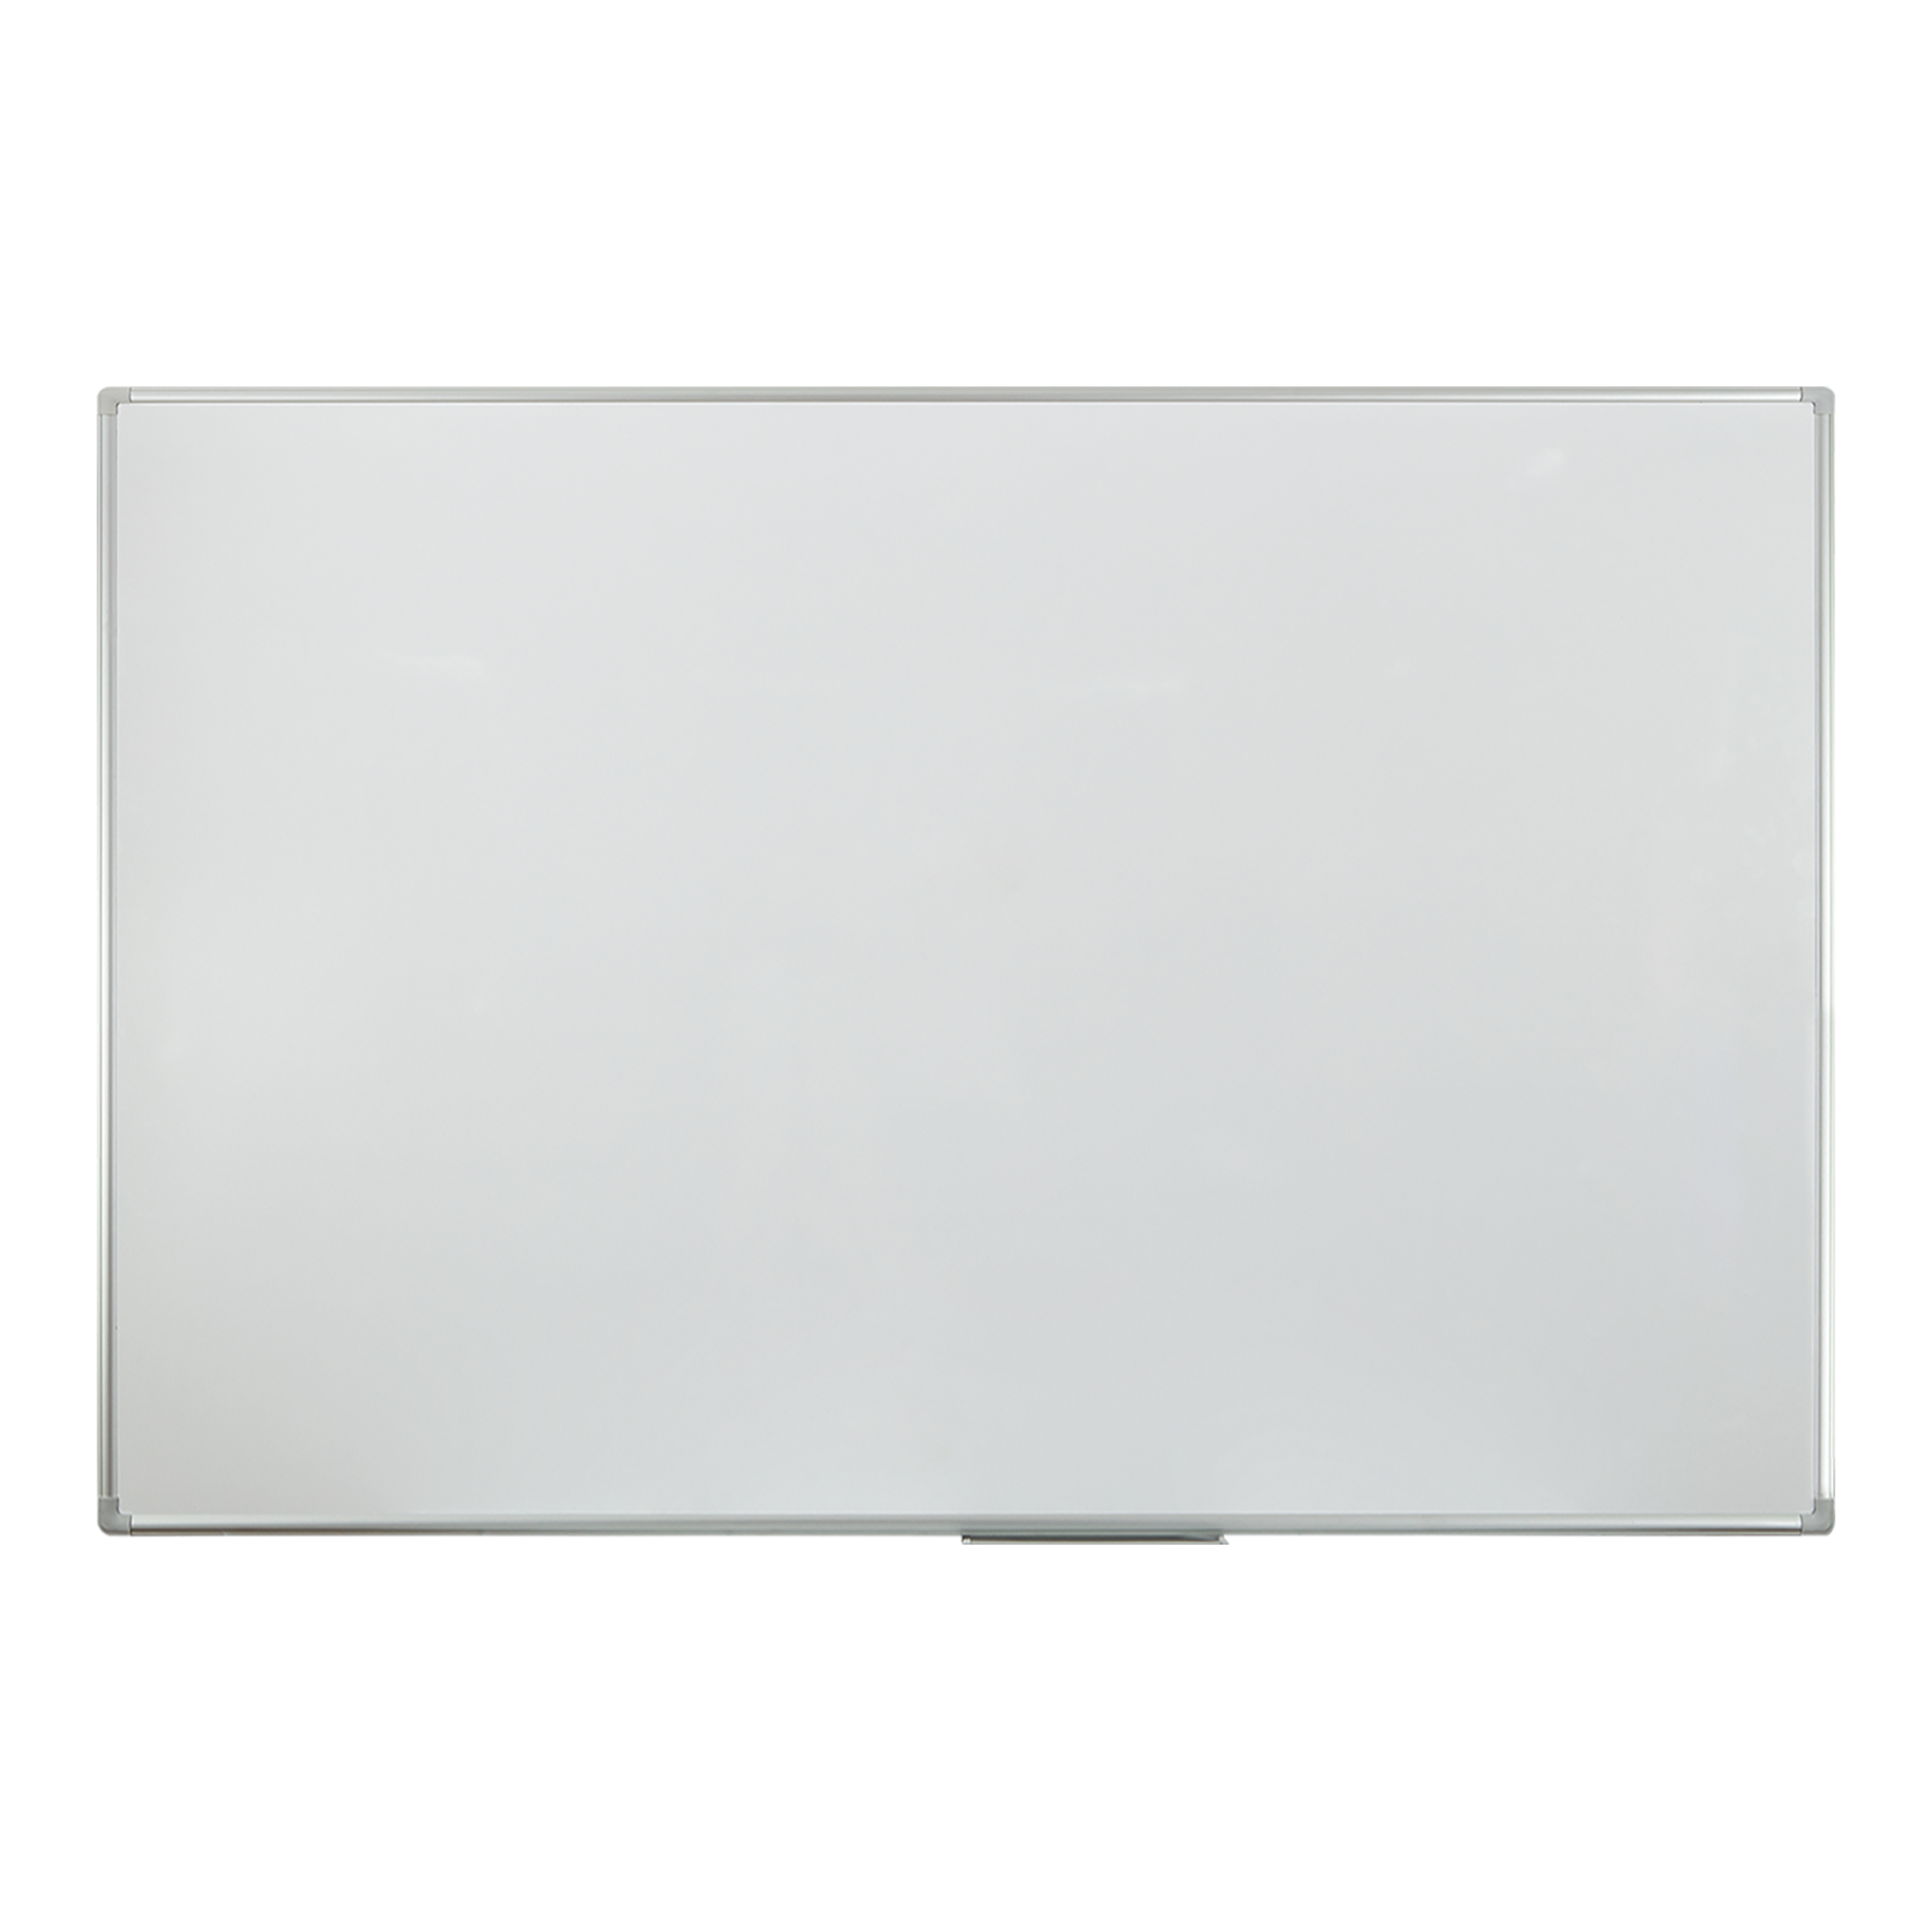 120*180 ELEGANT FRAME MAGNETIC SURFACE WHITE WRITING BOARD WITH WALL MOUNTED F. CHART